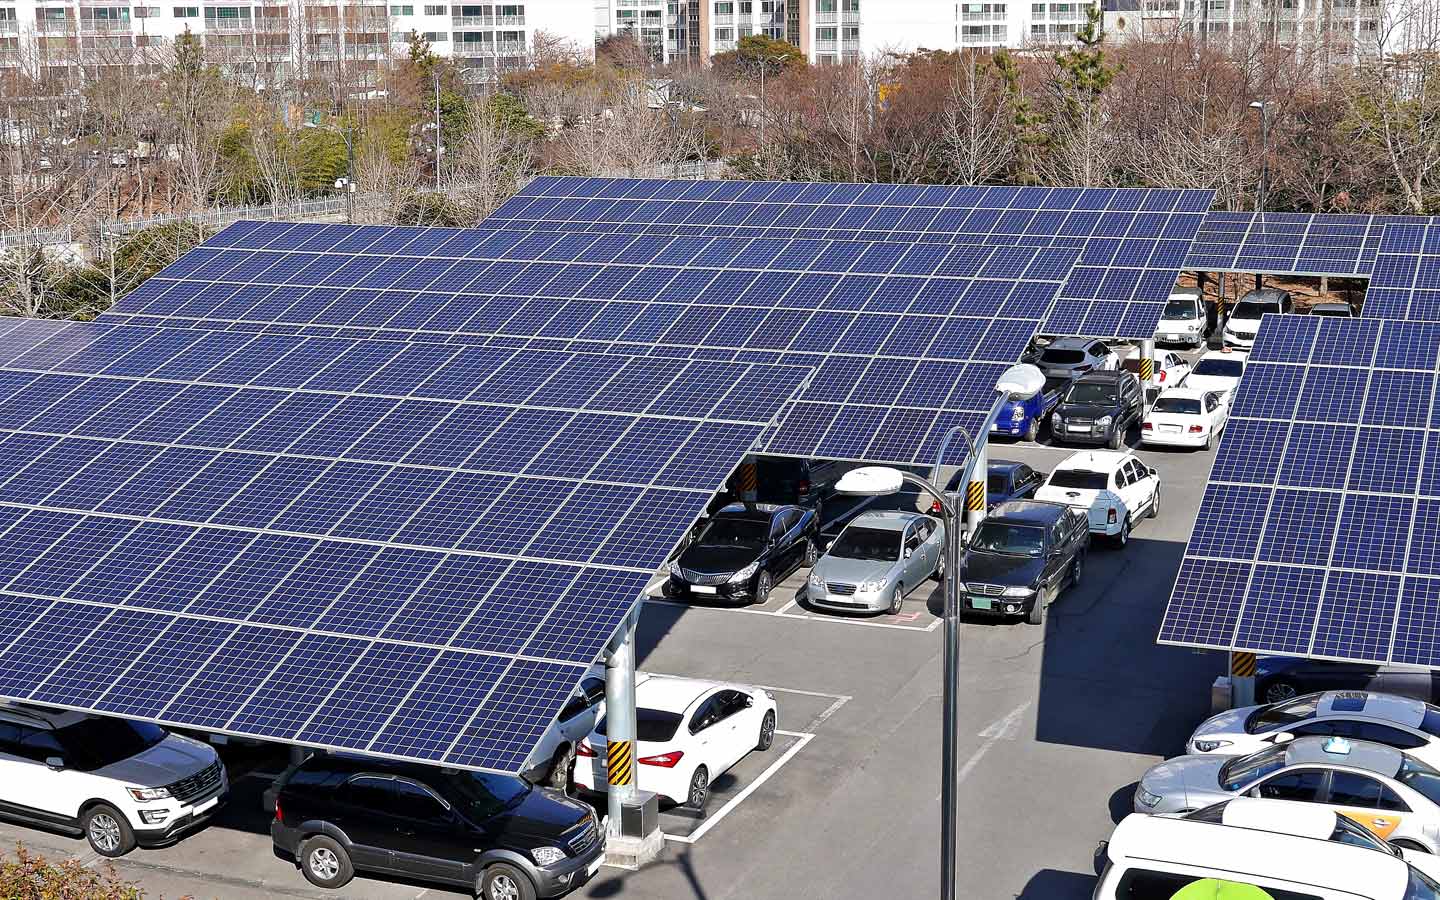 Governing bodies around the world are supporting the cause and introducing environment-friendly projects, like Abu Dhabi’s largest solar car park. 